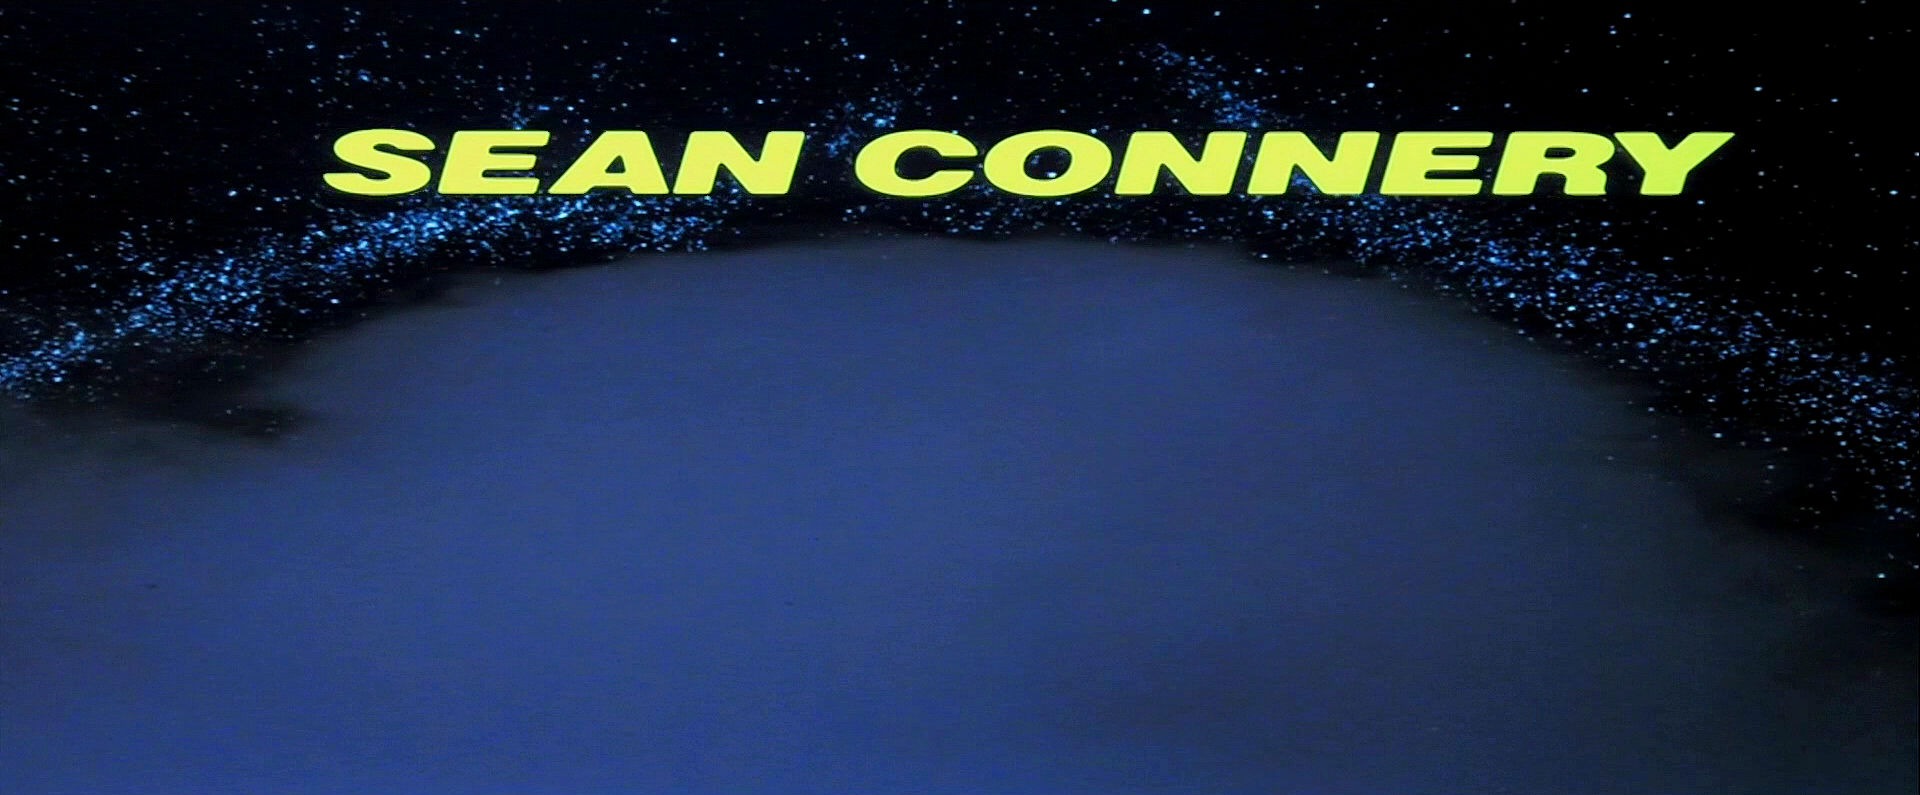 Main title from Meteor (1979) (1). Sean Connery